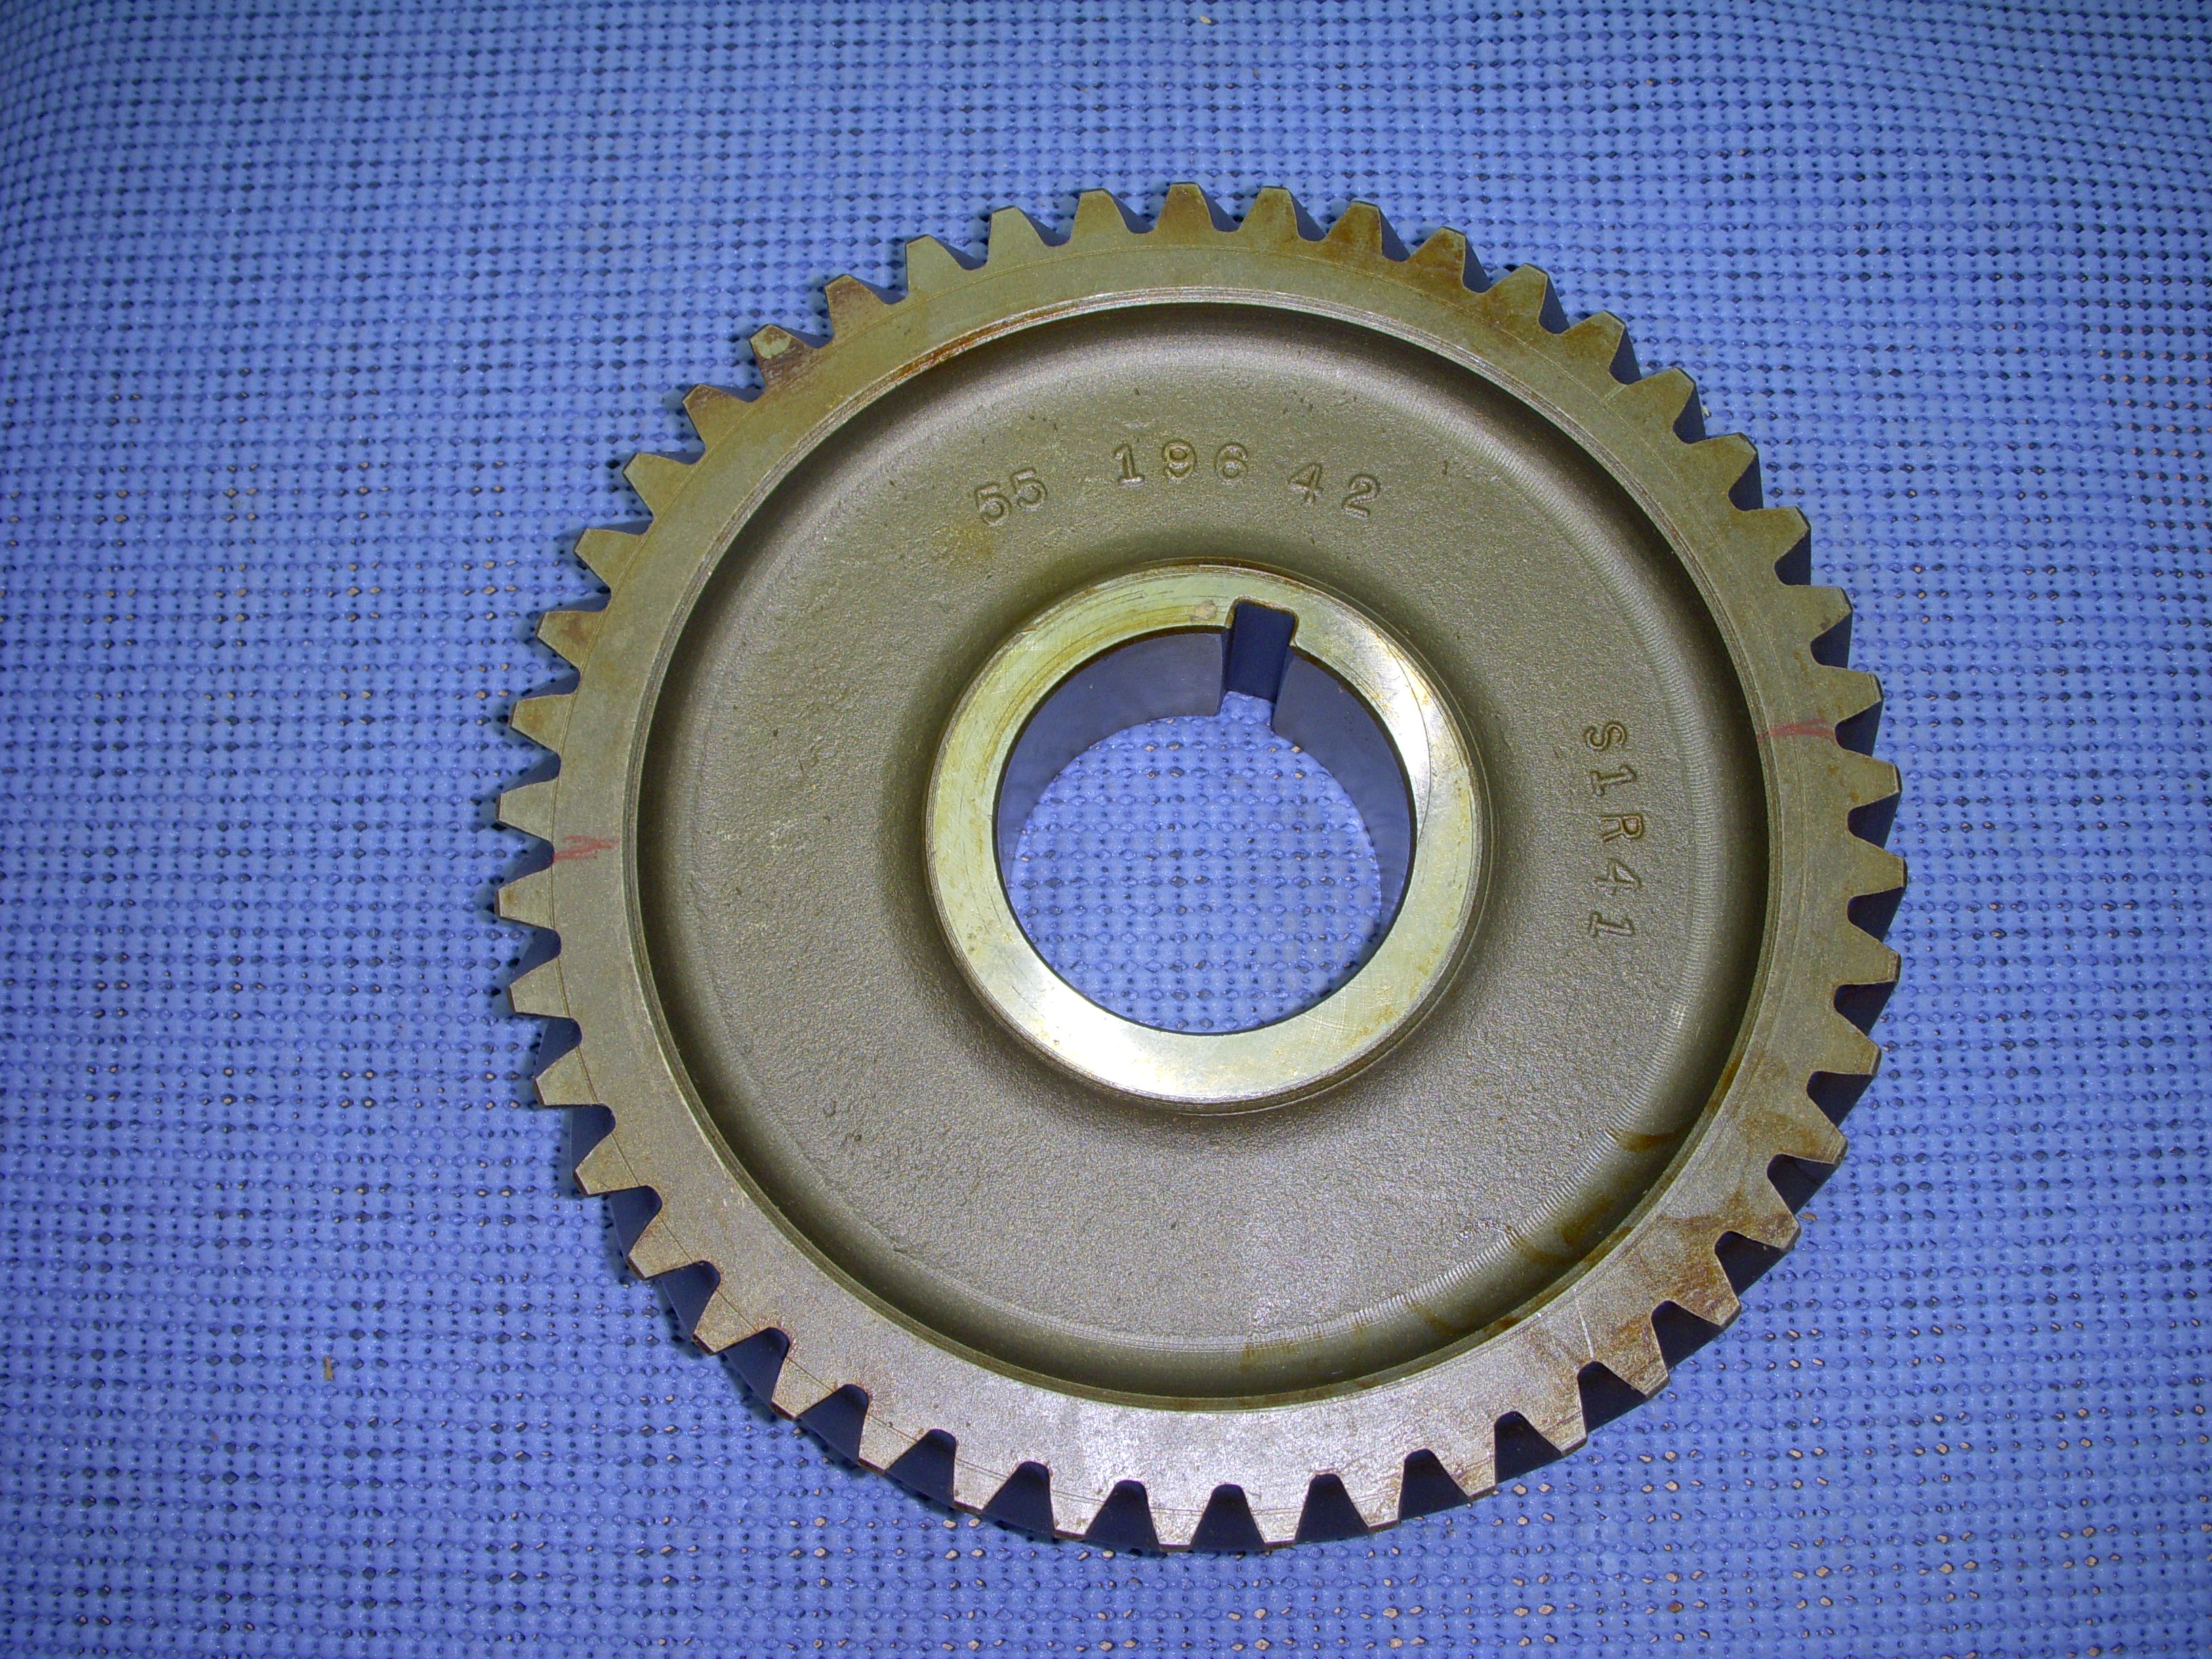 1955 GMC Transmission Countershaft 5th Speed Gear NOS # 2239959